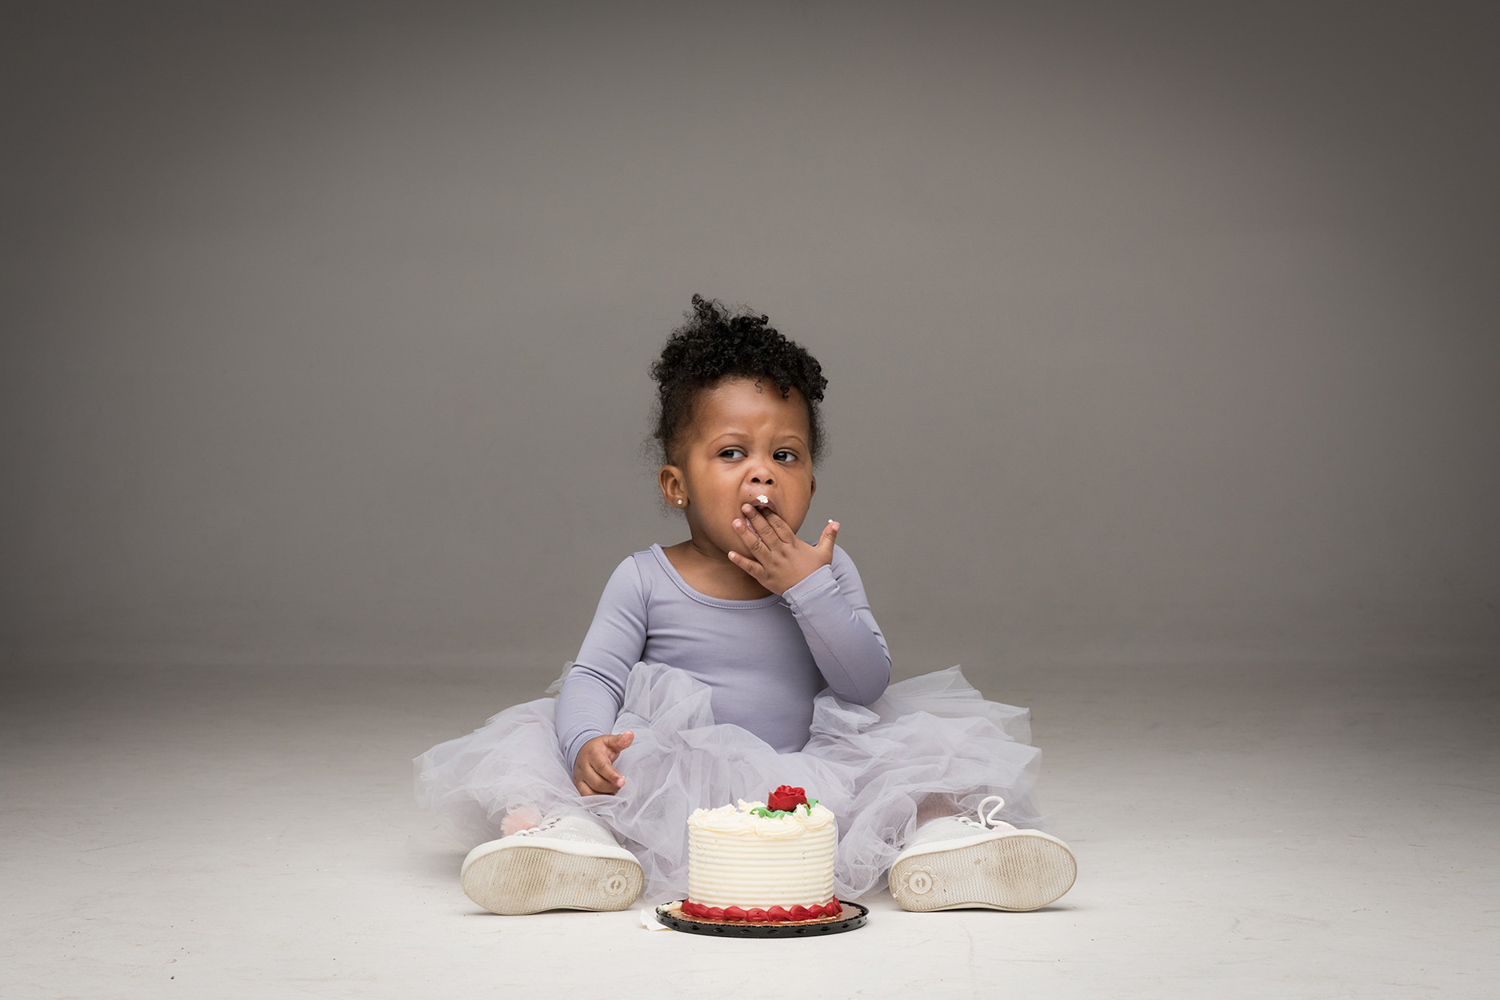 A Chicago toddler digs into a mini birthday cake in a grey tutu.